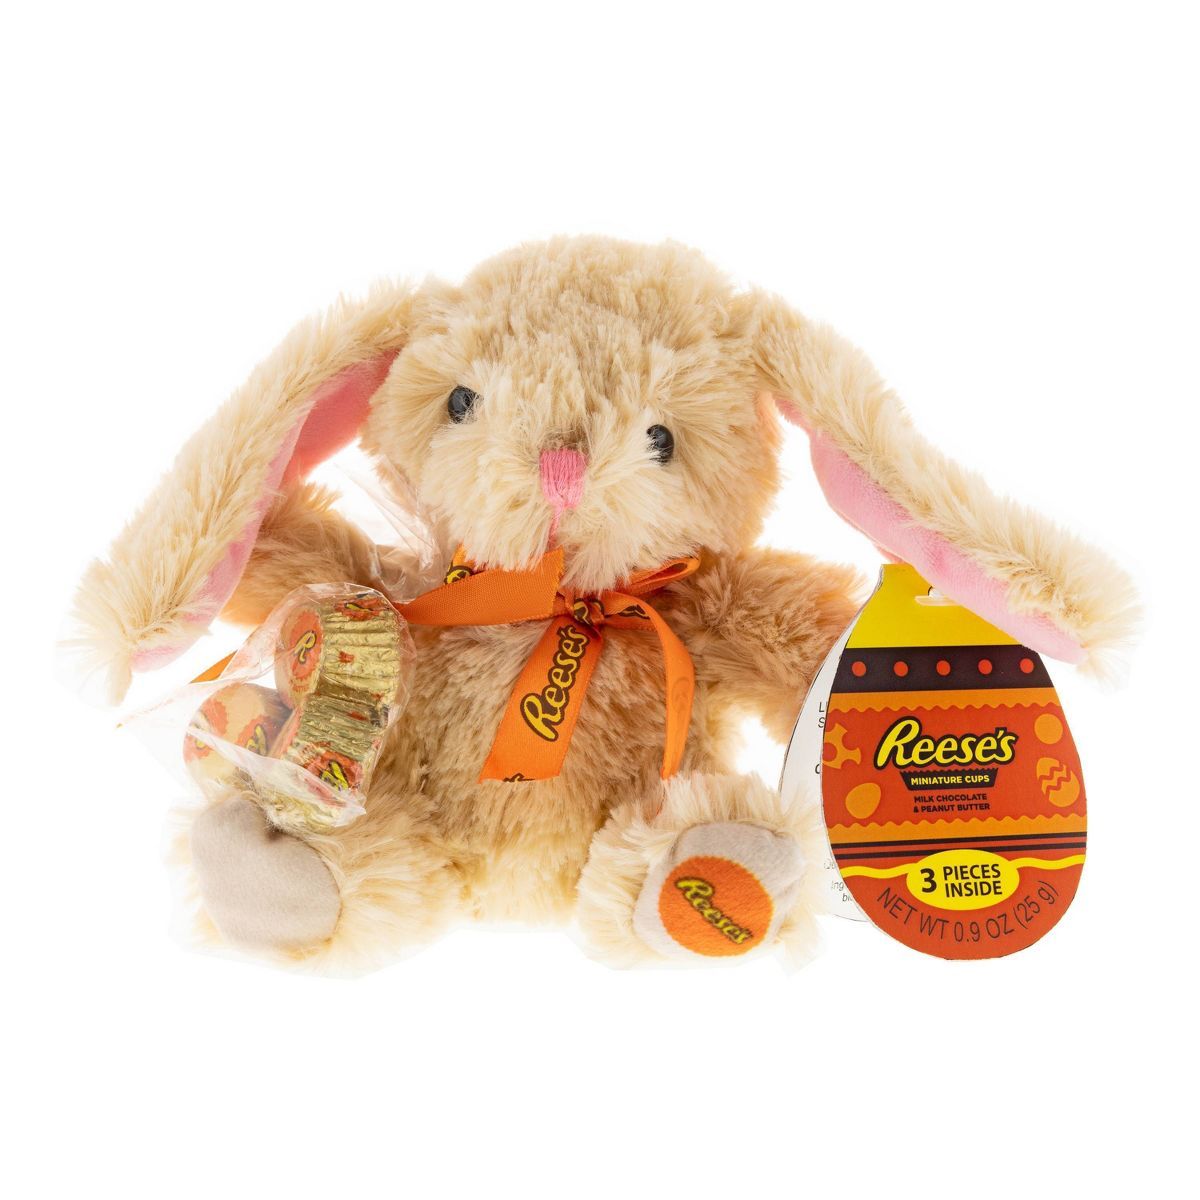 Hershey's Reese's Easter Long Ear Bunny Plush with Reese's Cups - 0.9oz | Target